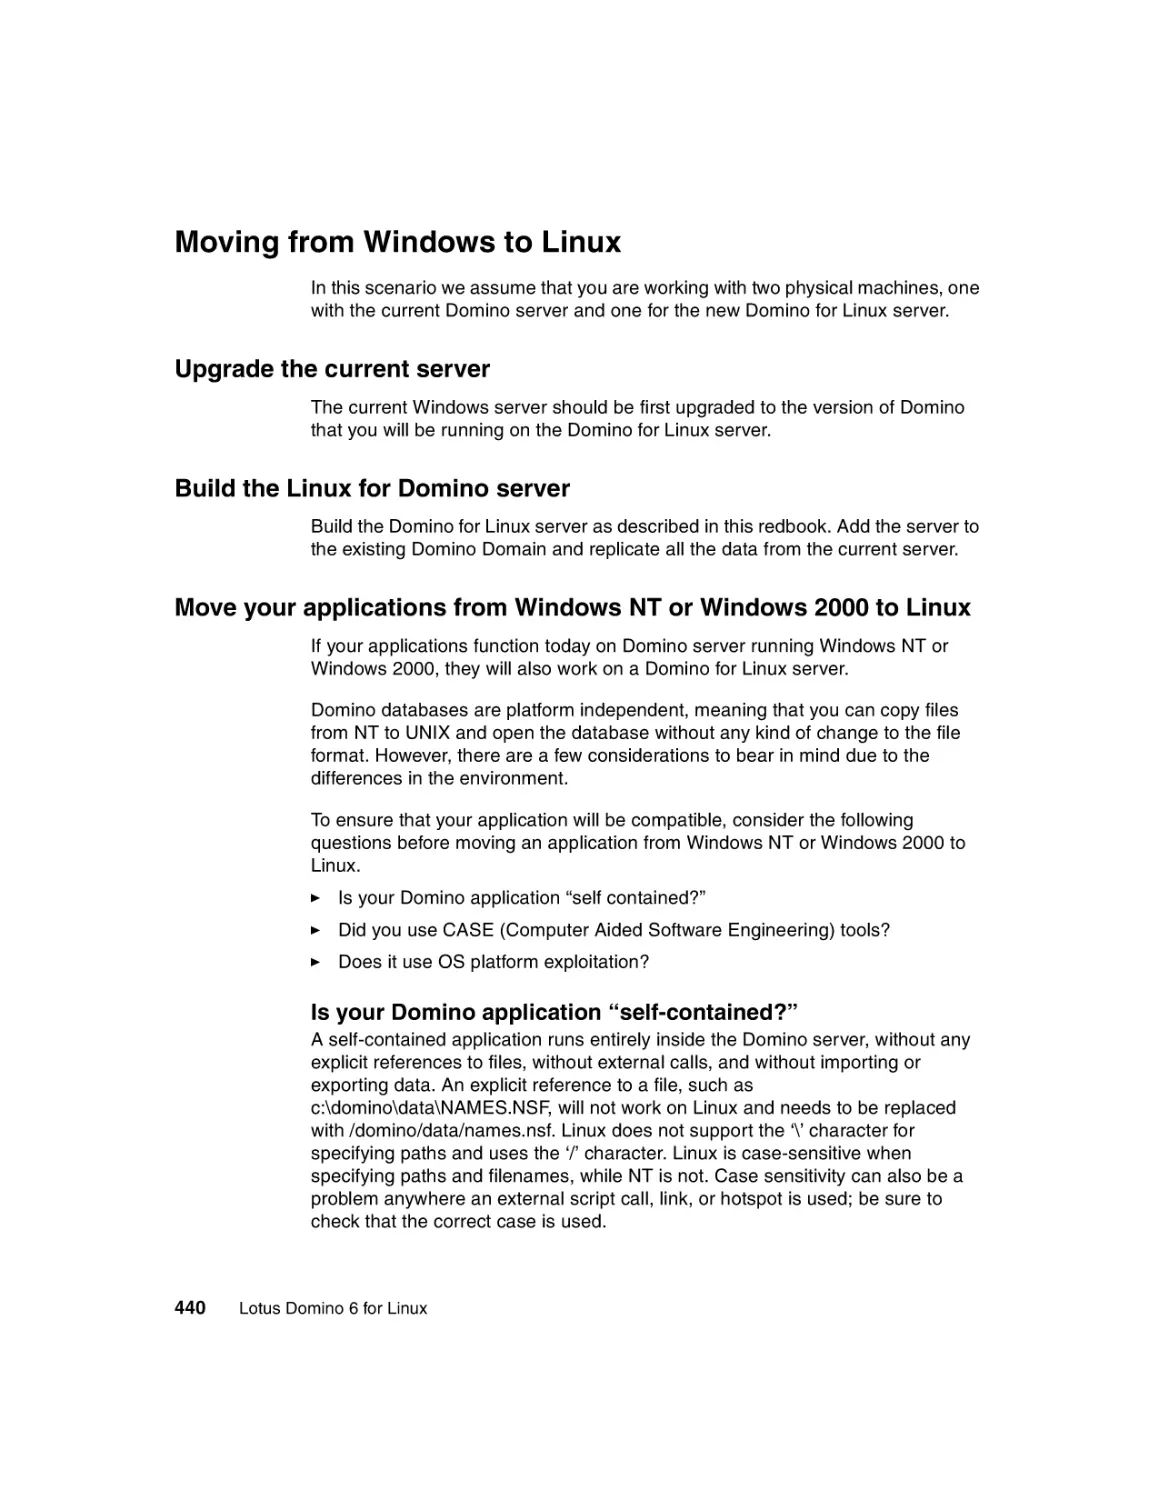 Moving from Windows to Linux
Upgrade the current server
Build the Linux for Domino server
Move your applications from Windows NT or Windows 2000 to Linux